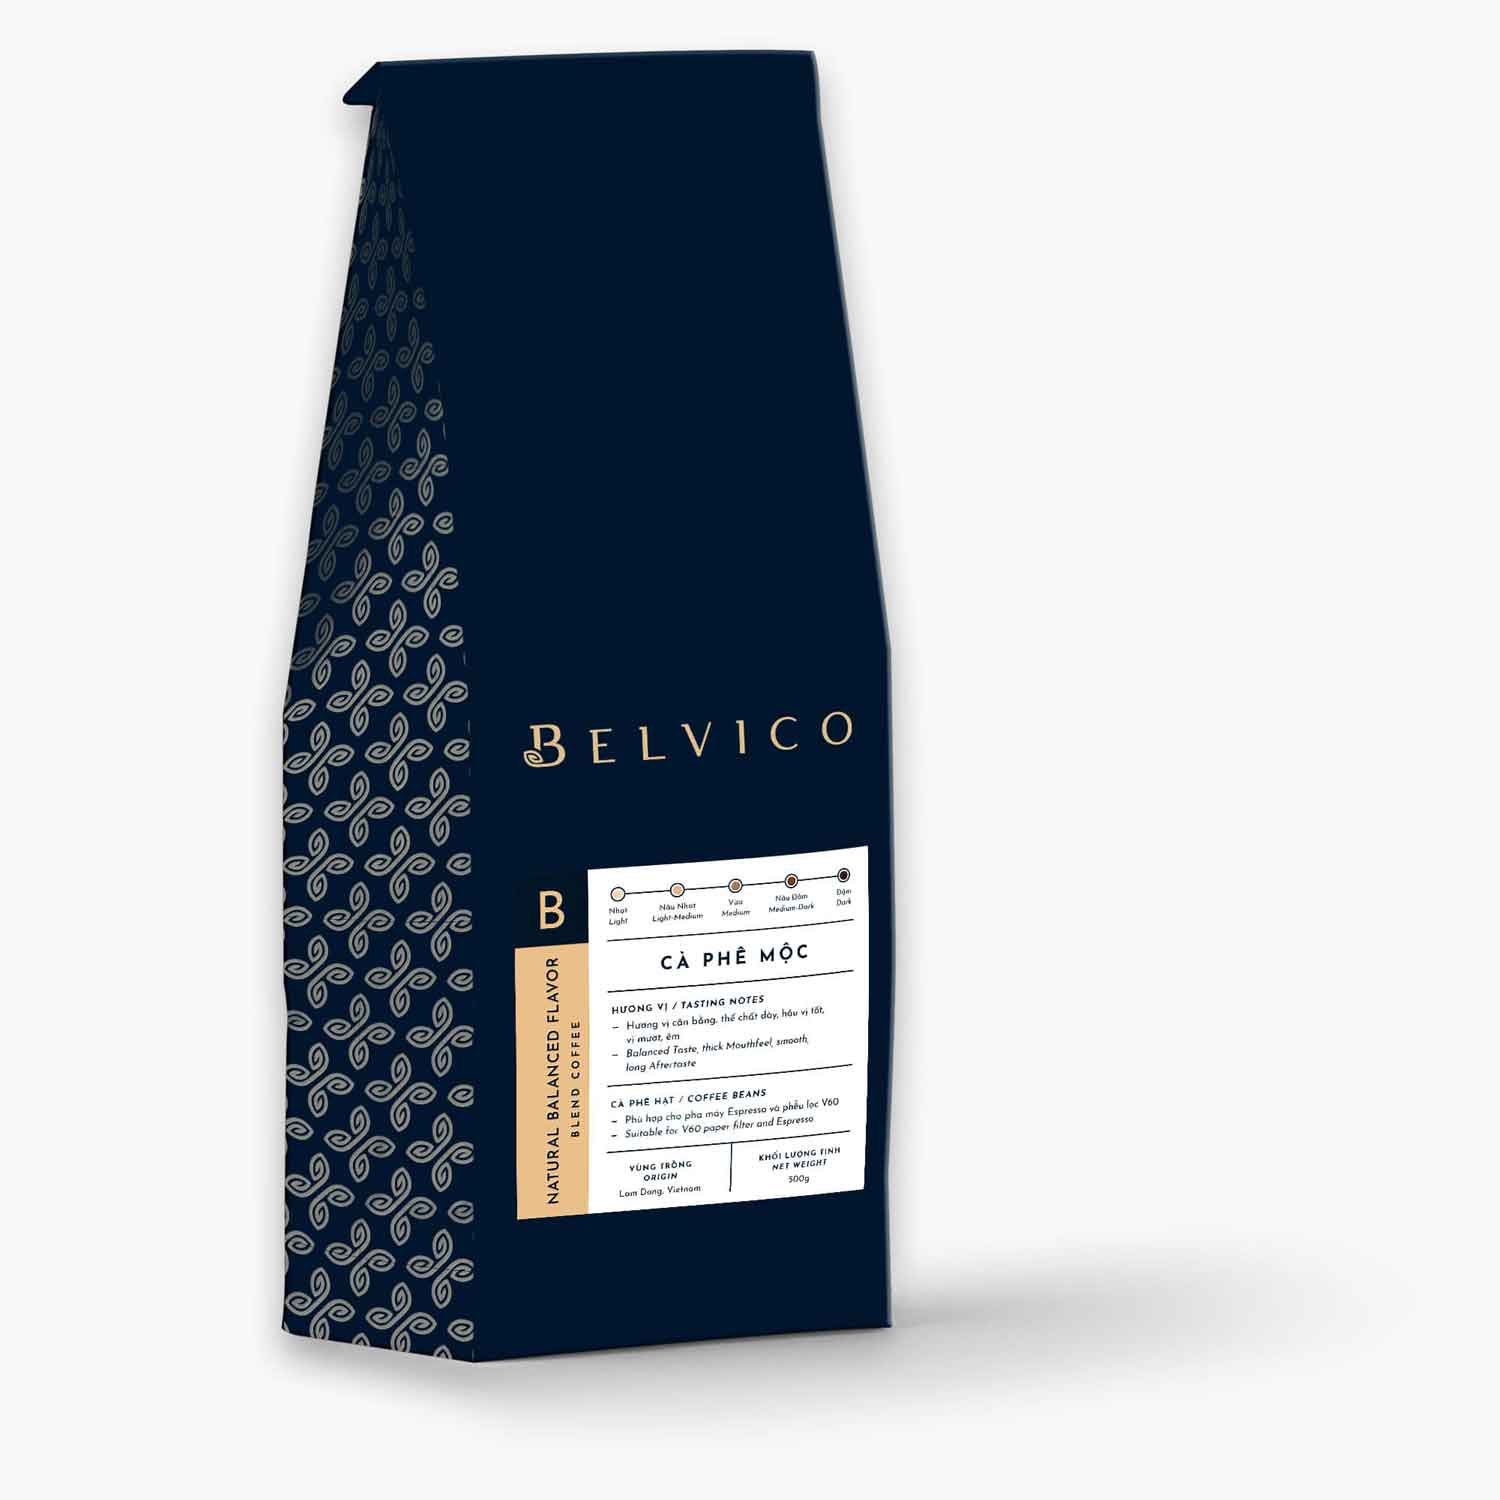 12-MONTH COFFEE SUBSCRIPTION